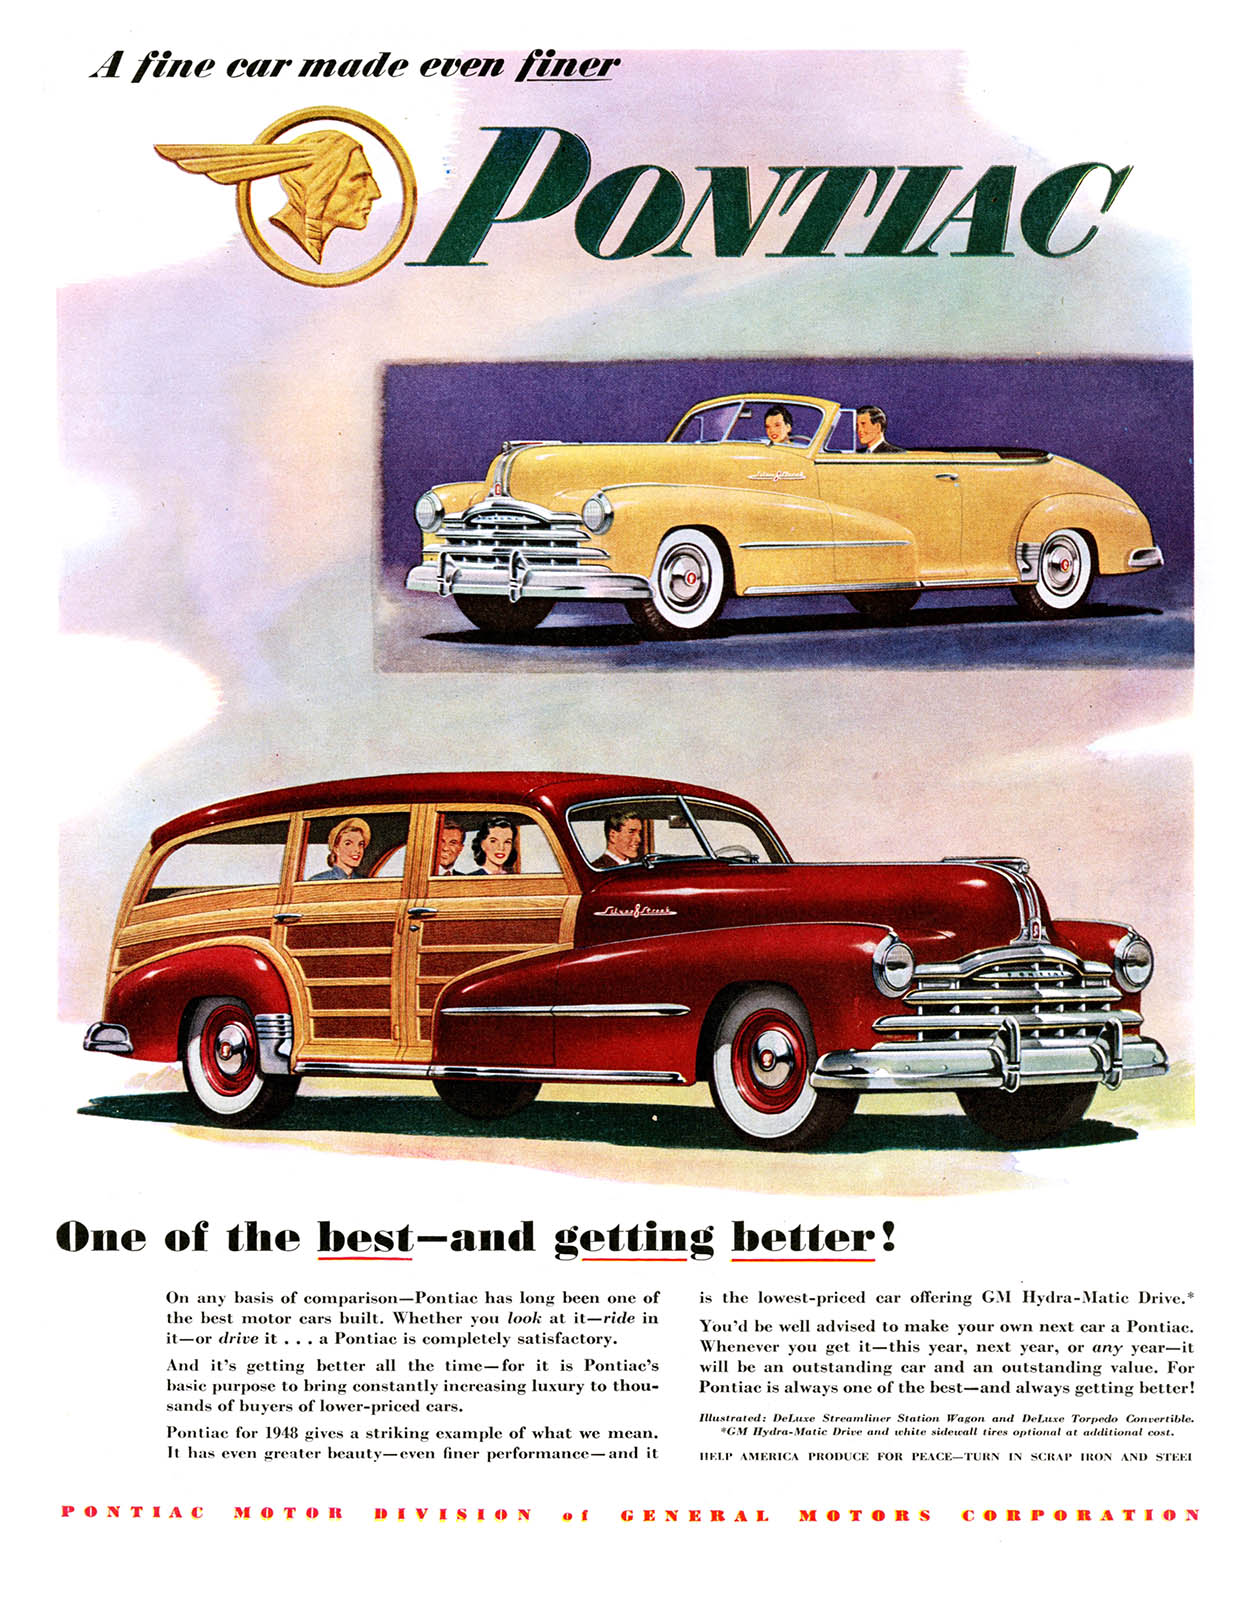 Pontiac DeLuxe Streamliner Station Wagon/DeLuxe Torpedo Convertible Ad (May, 1948): One of the best–and getting better!